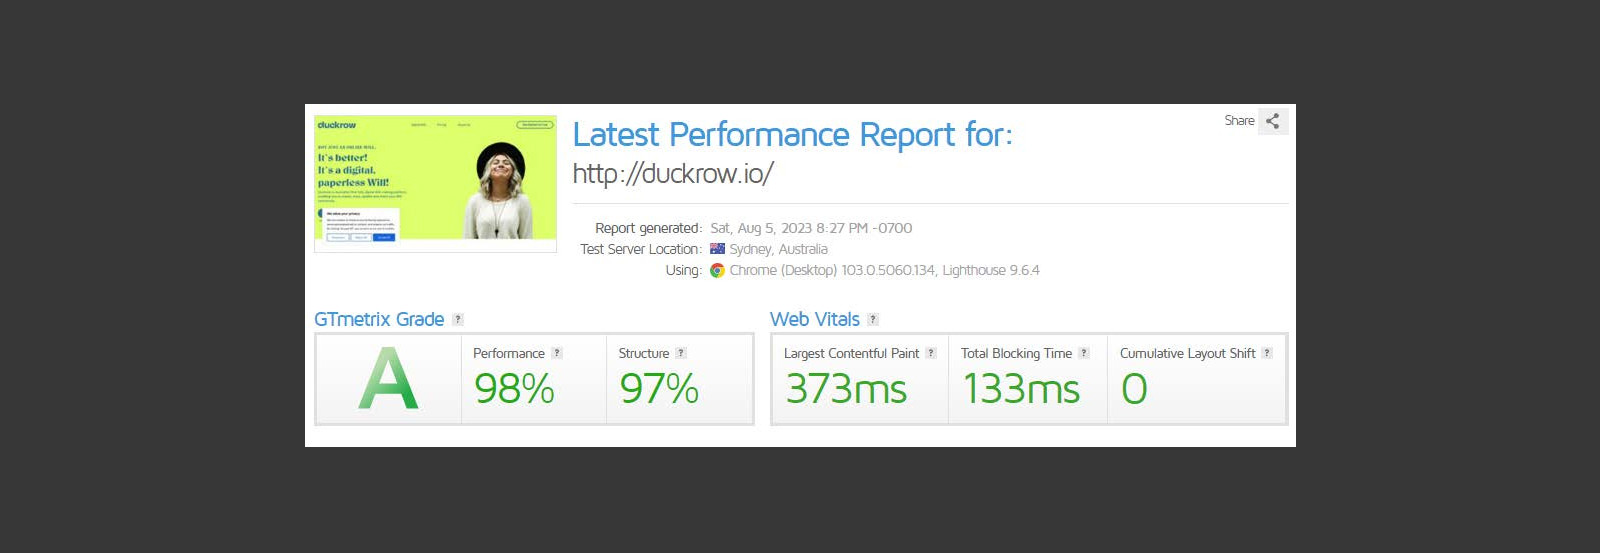 Screenshot of a performance report for duckcrow.io showing a GTMetrix grade of A, with a performance score of 98% and structure score of 97%. Various web vitals metrics are displayed below these scores.